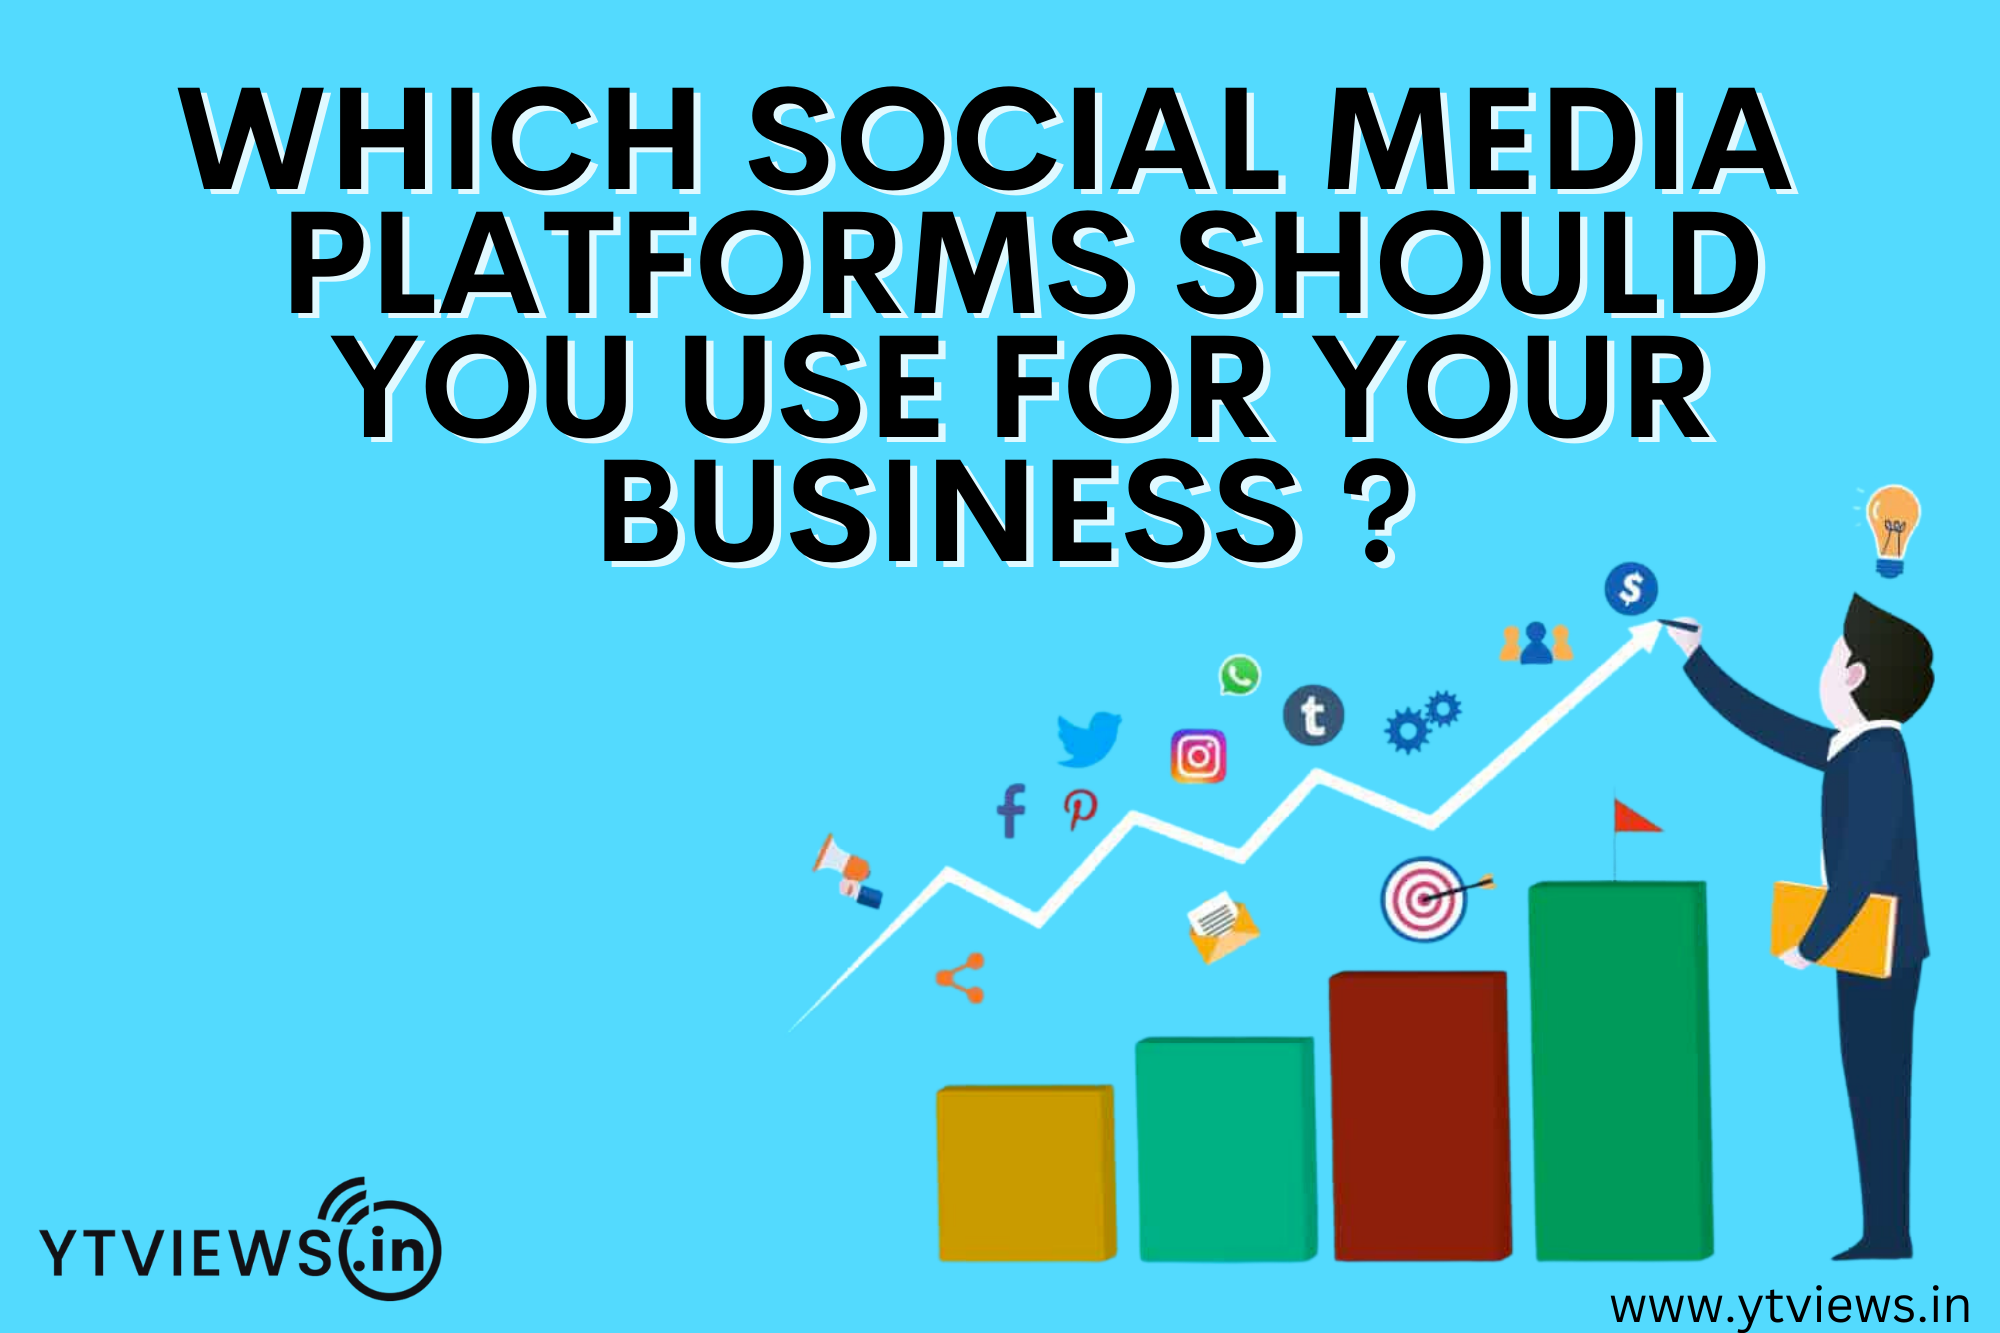 Which Social Media Platforms Should You Use for Your Business?